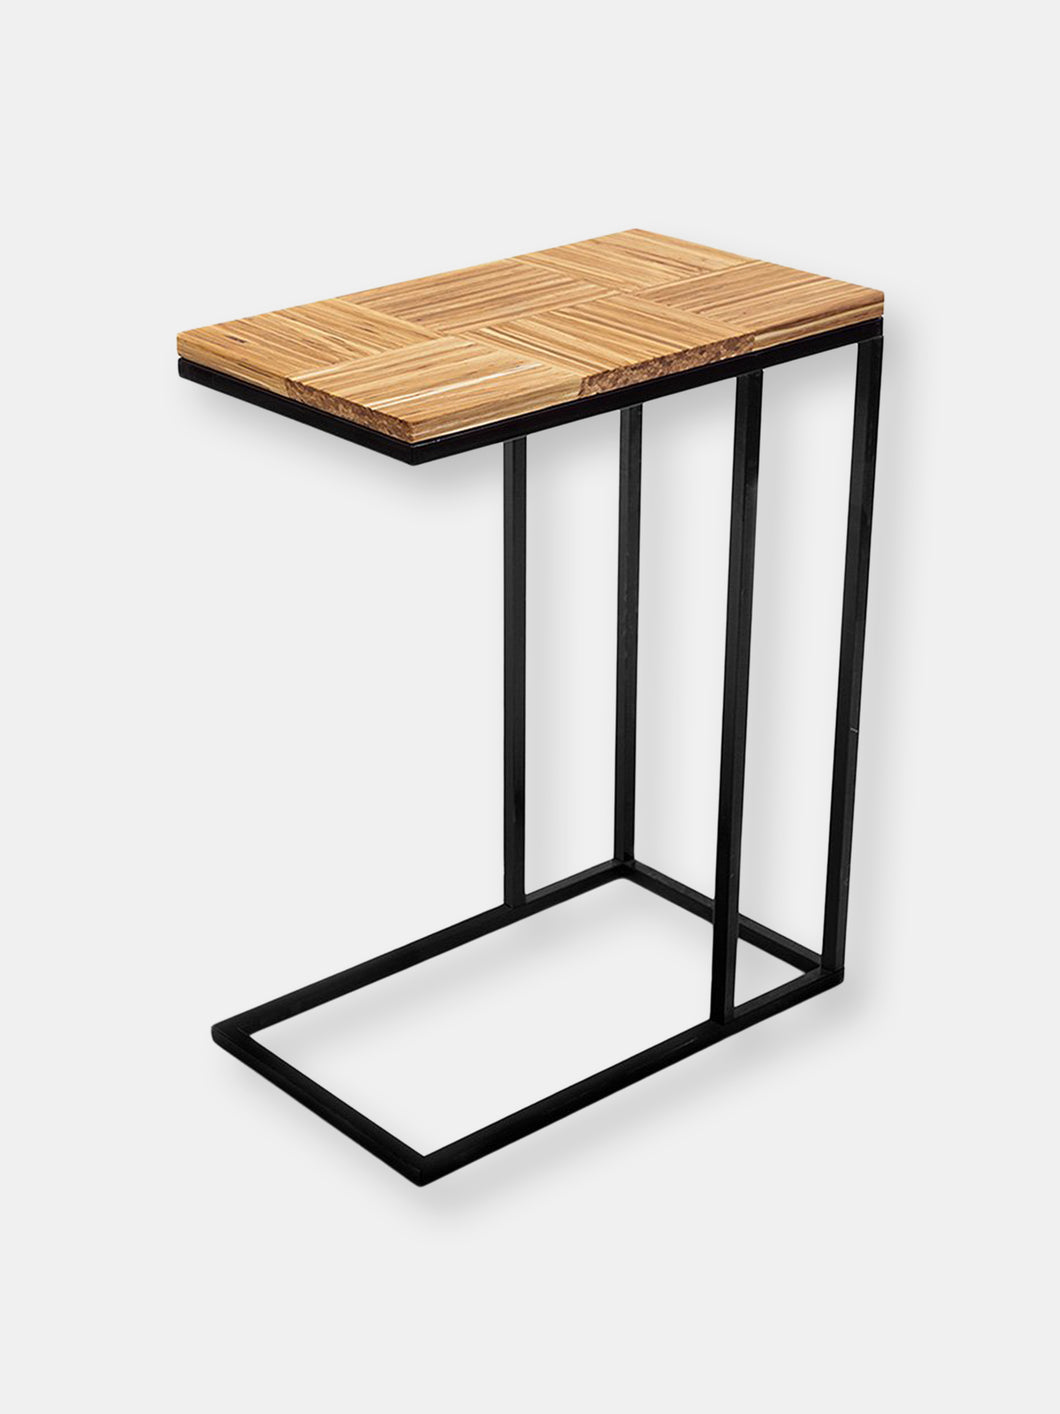 C-Side Table